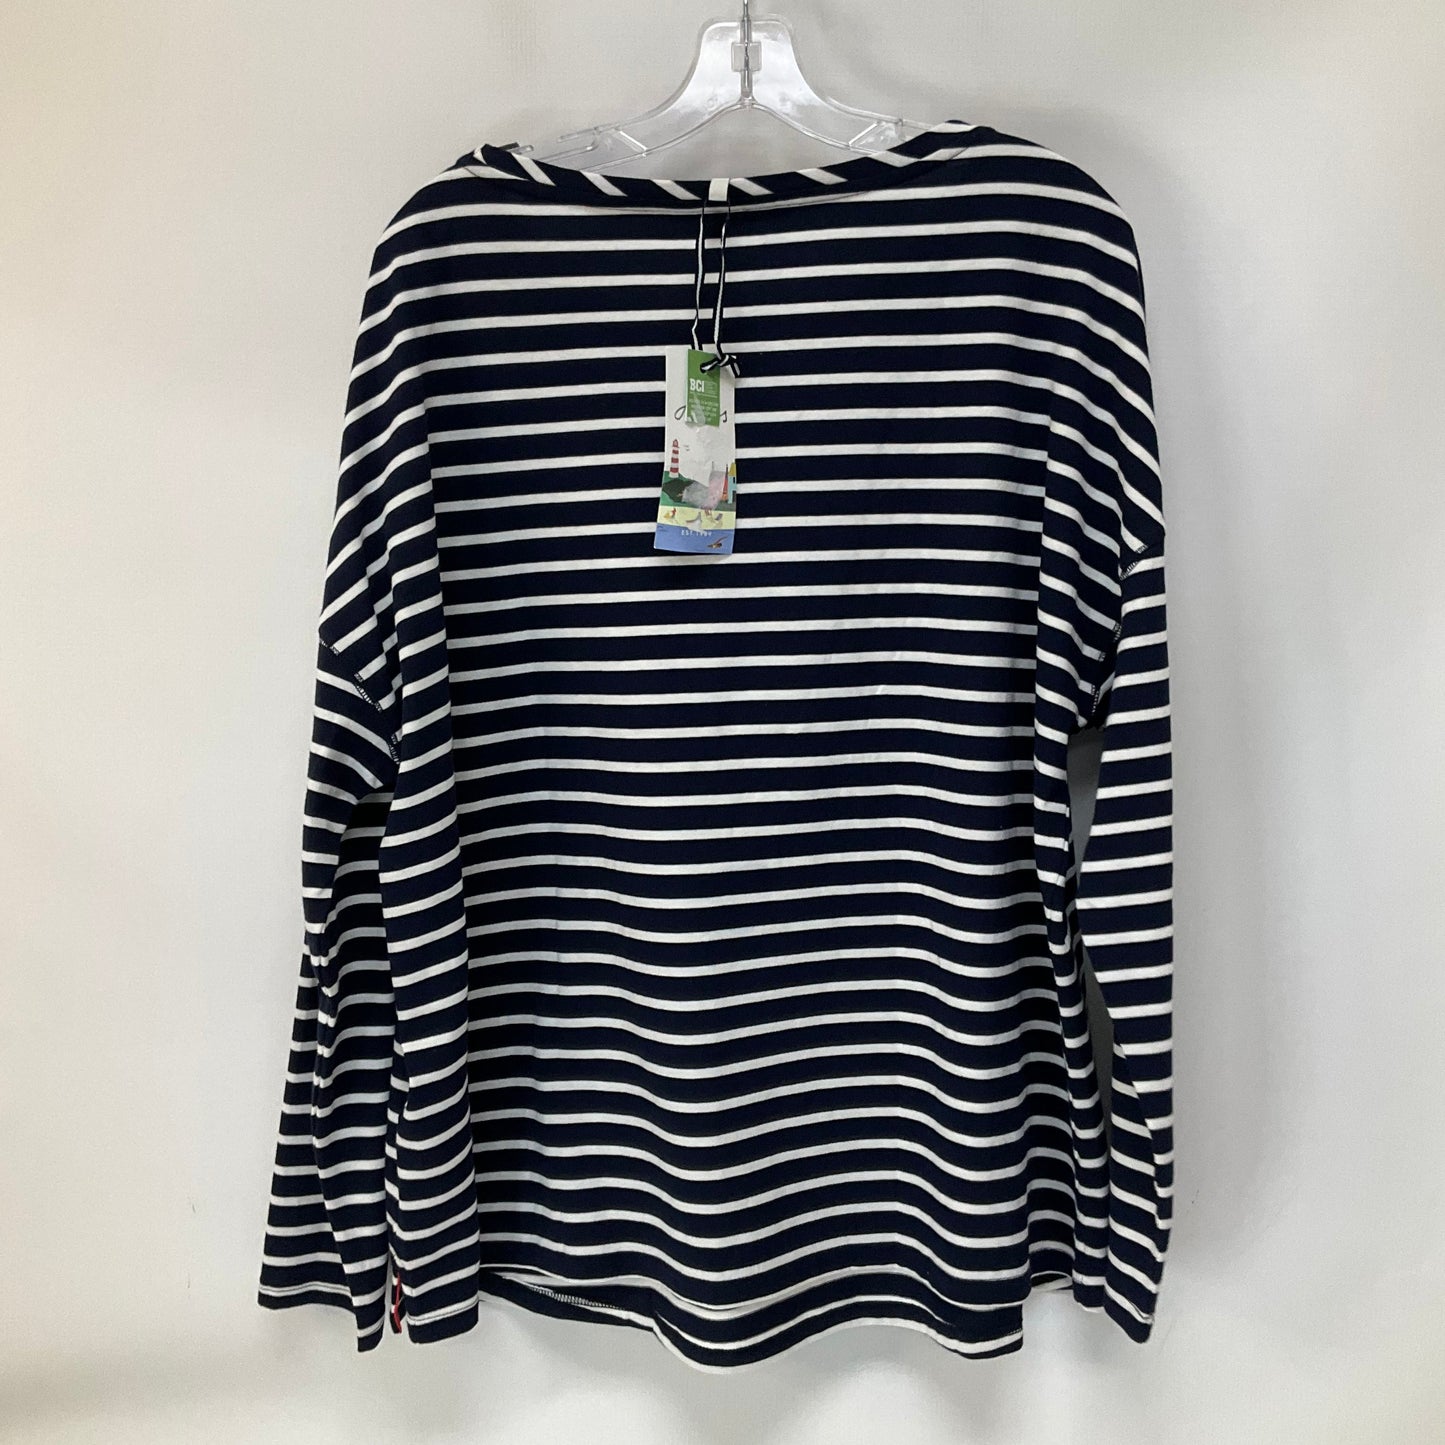 Striped Pattern Top Long Sleeve Joules, Size 14